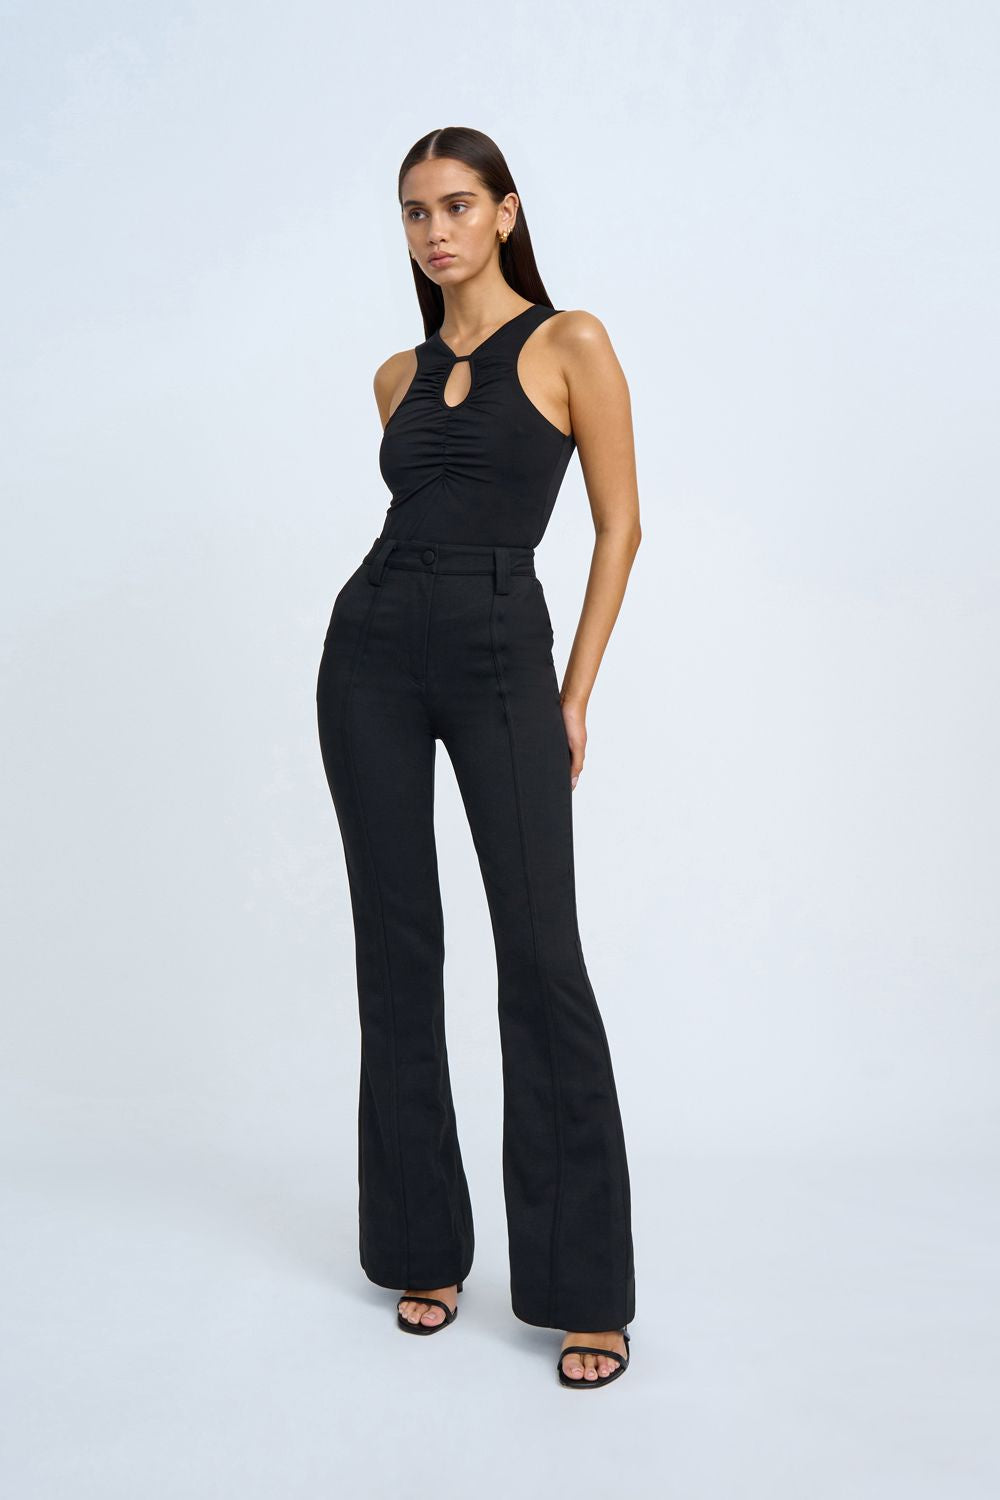 BY JOHNNY- LUCIANA FLARE TROUSER PANT-BLACK